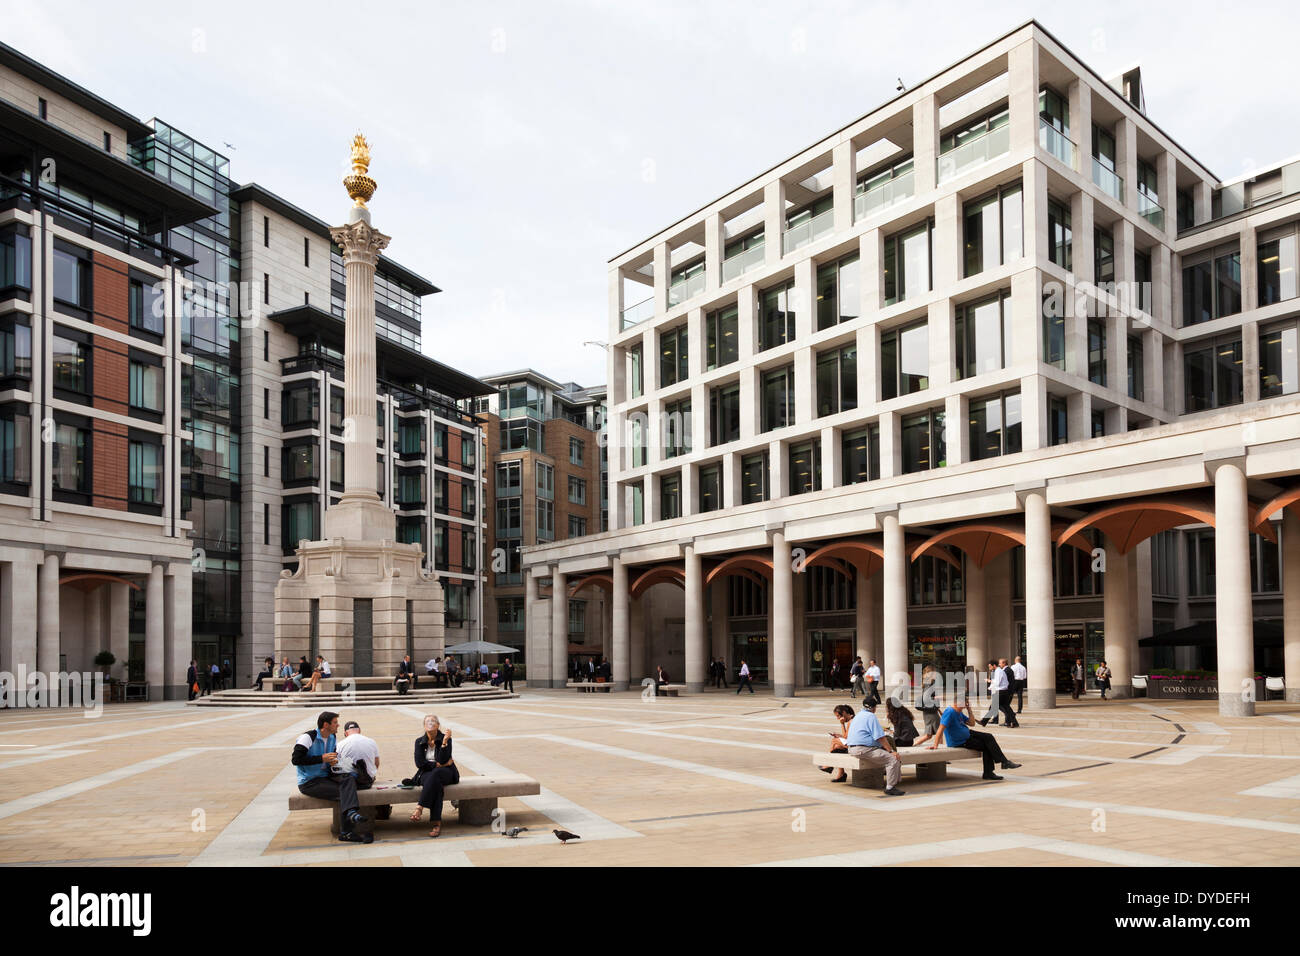 Patenoster Square and column in London. Stock Photo